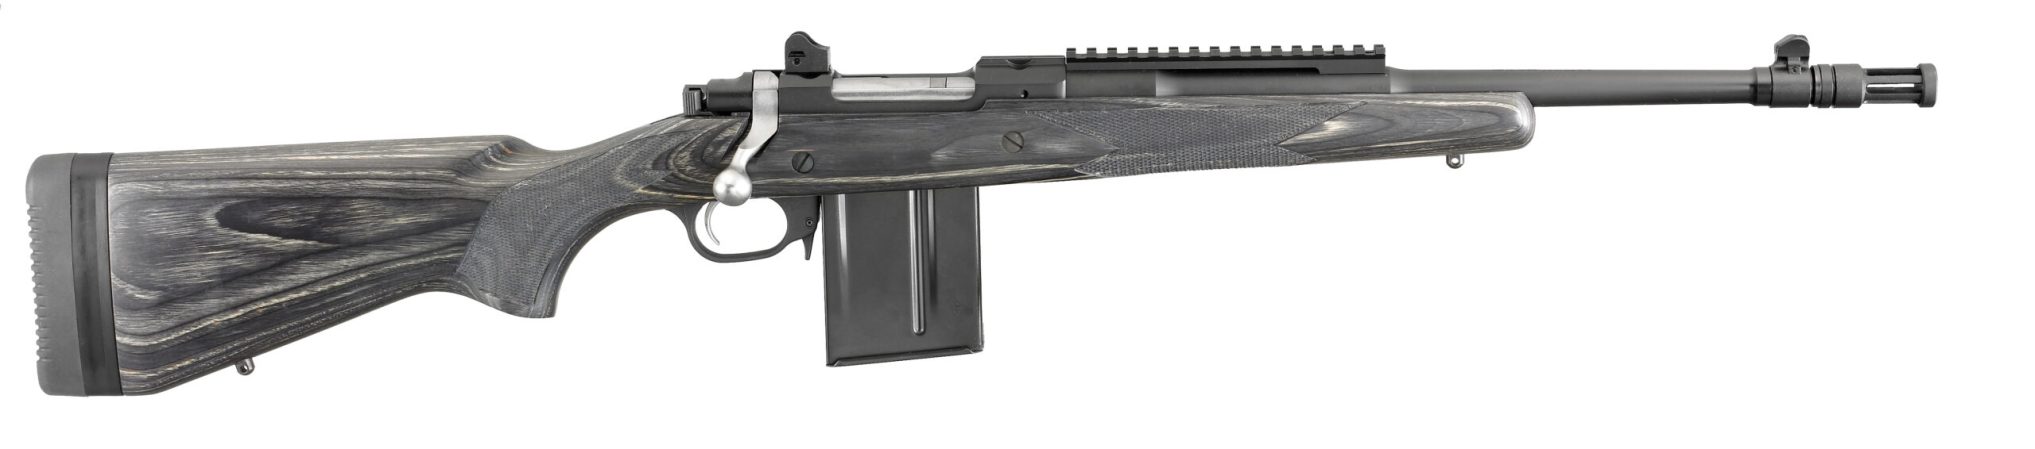 New Ruger Scout Rifle in 5.56 NATO